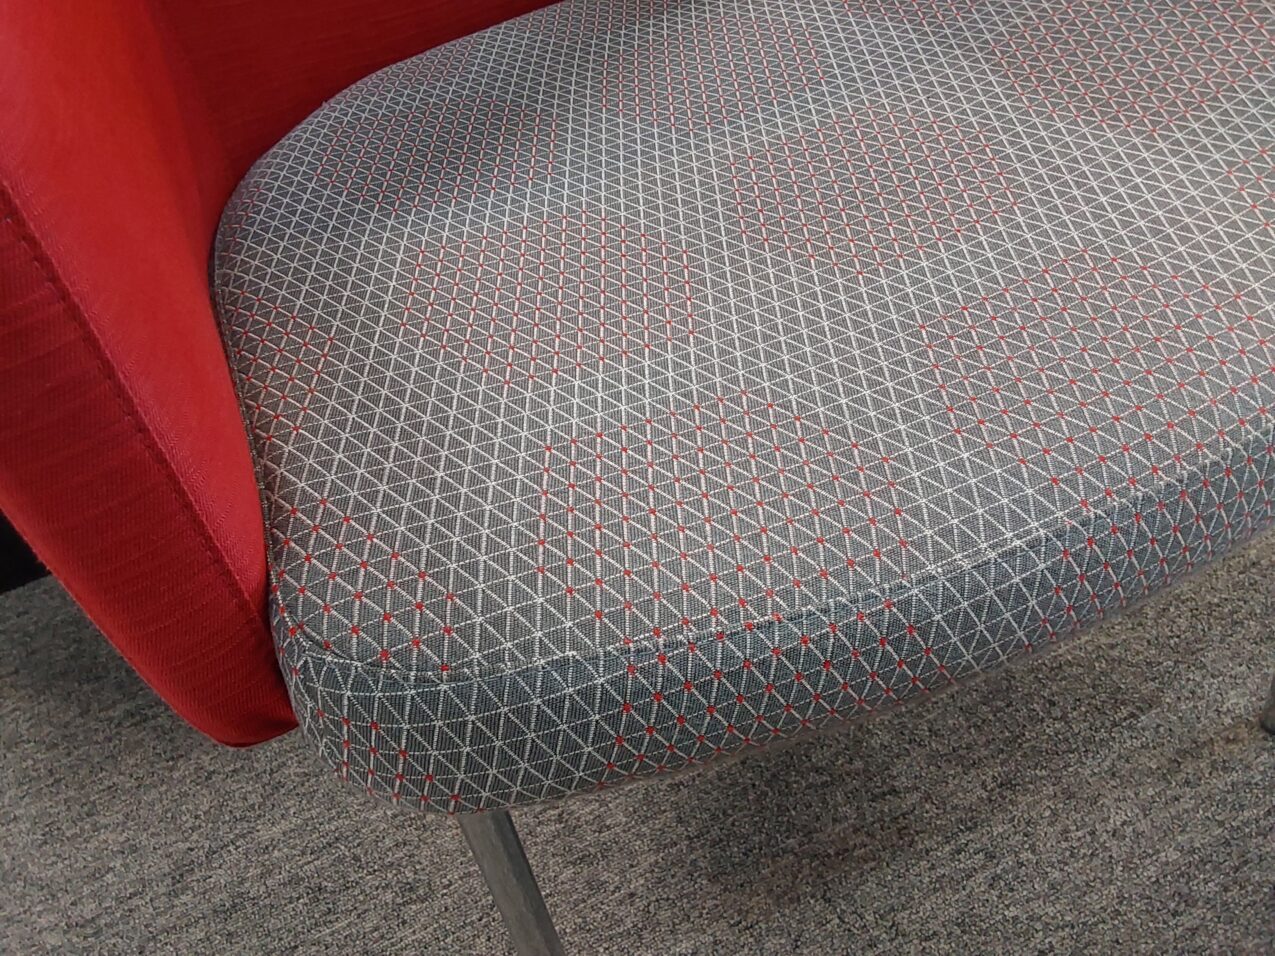 Ofs side chair seat pattern